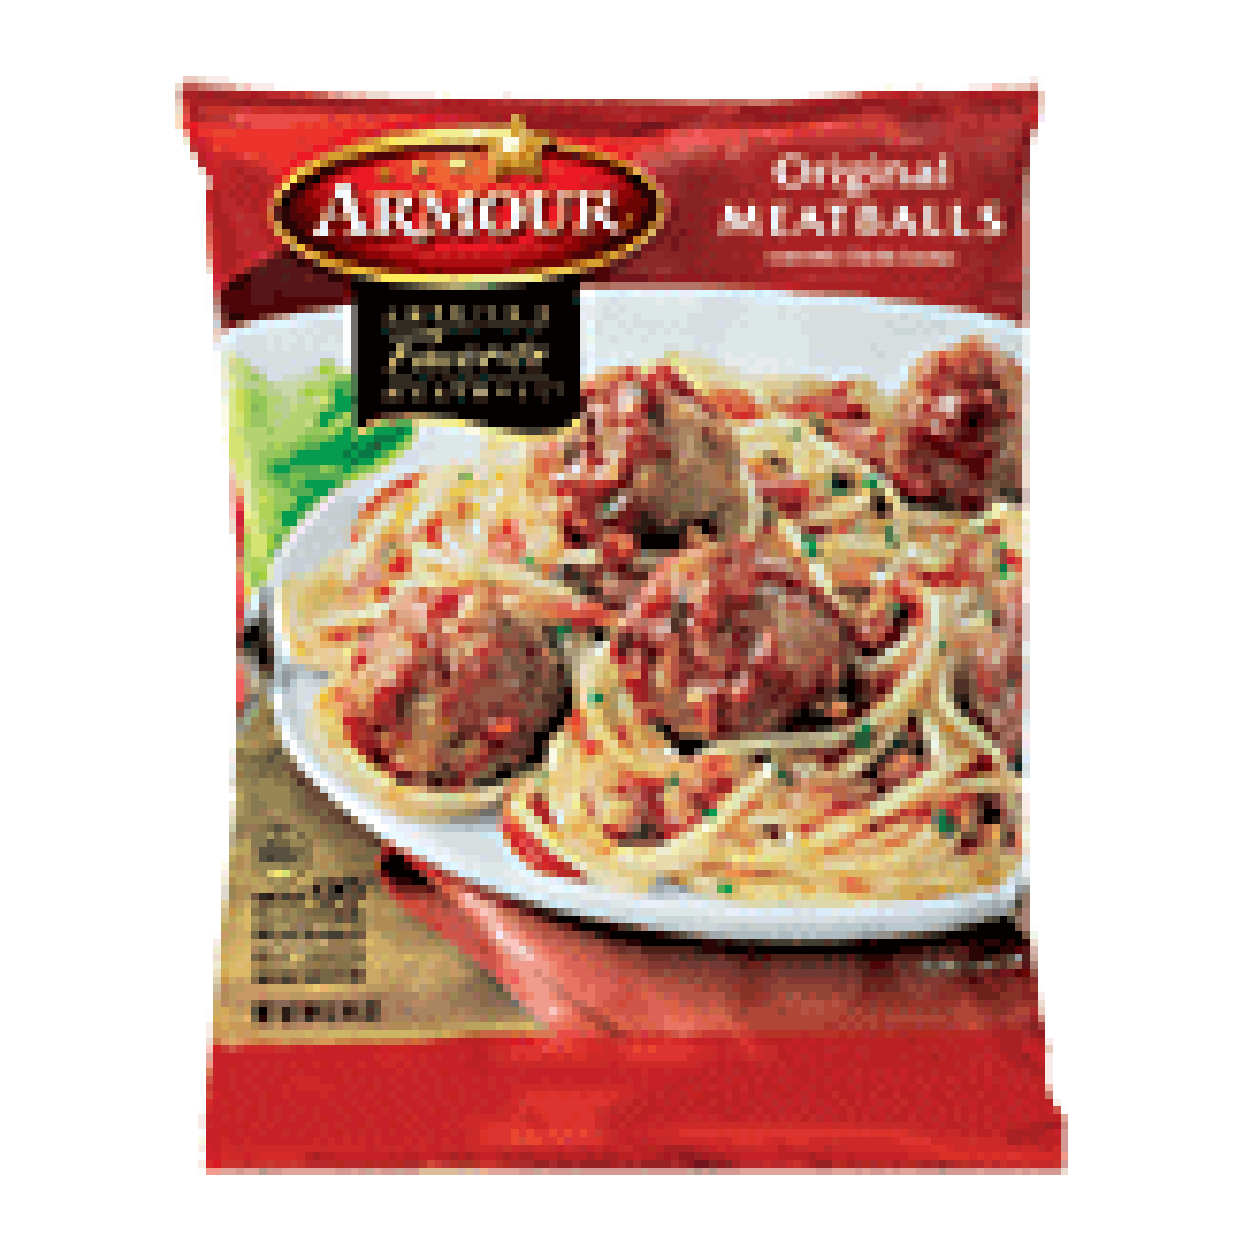 Armour Original Meatballs Party Size Over 120 Fully Cooked Meat 64oz